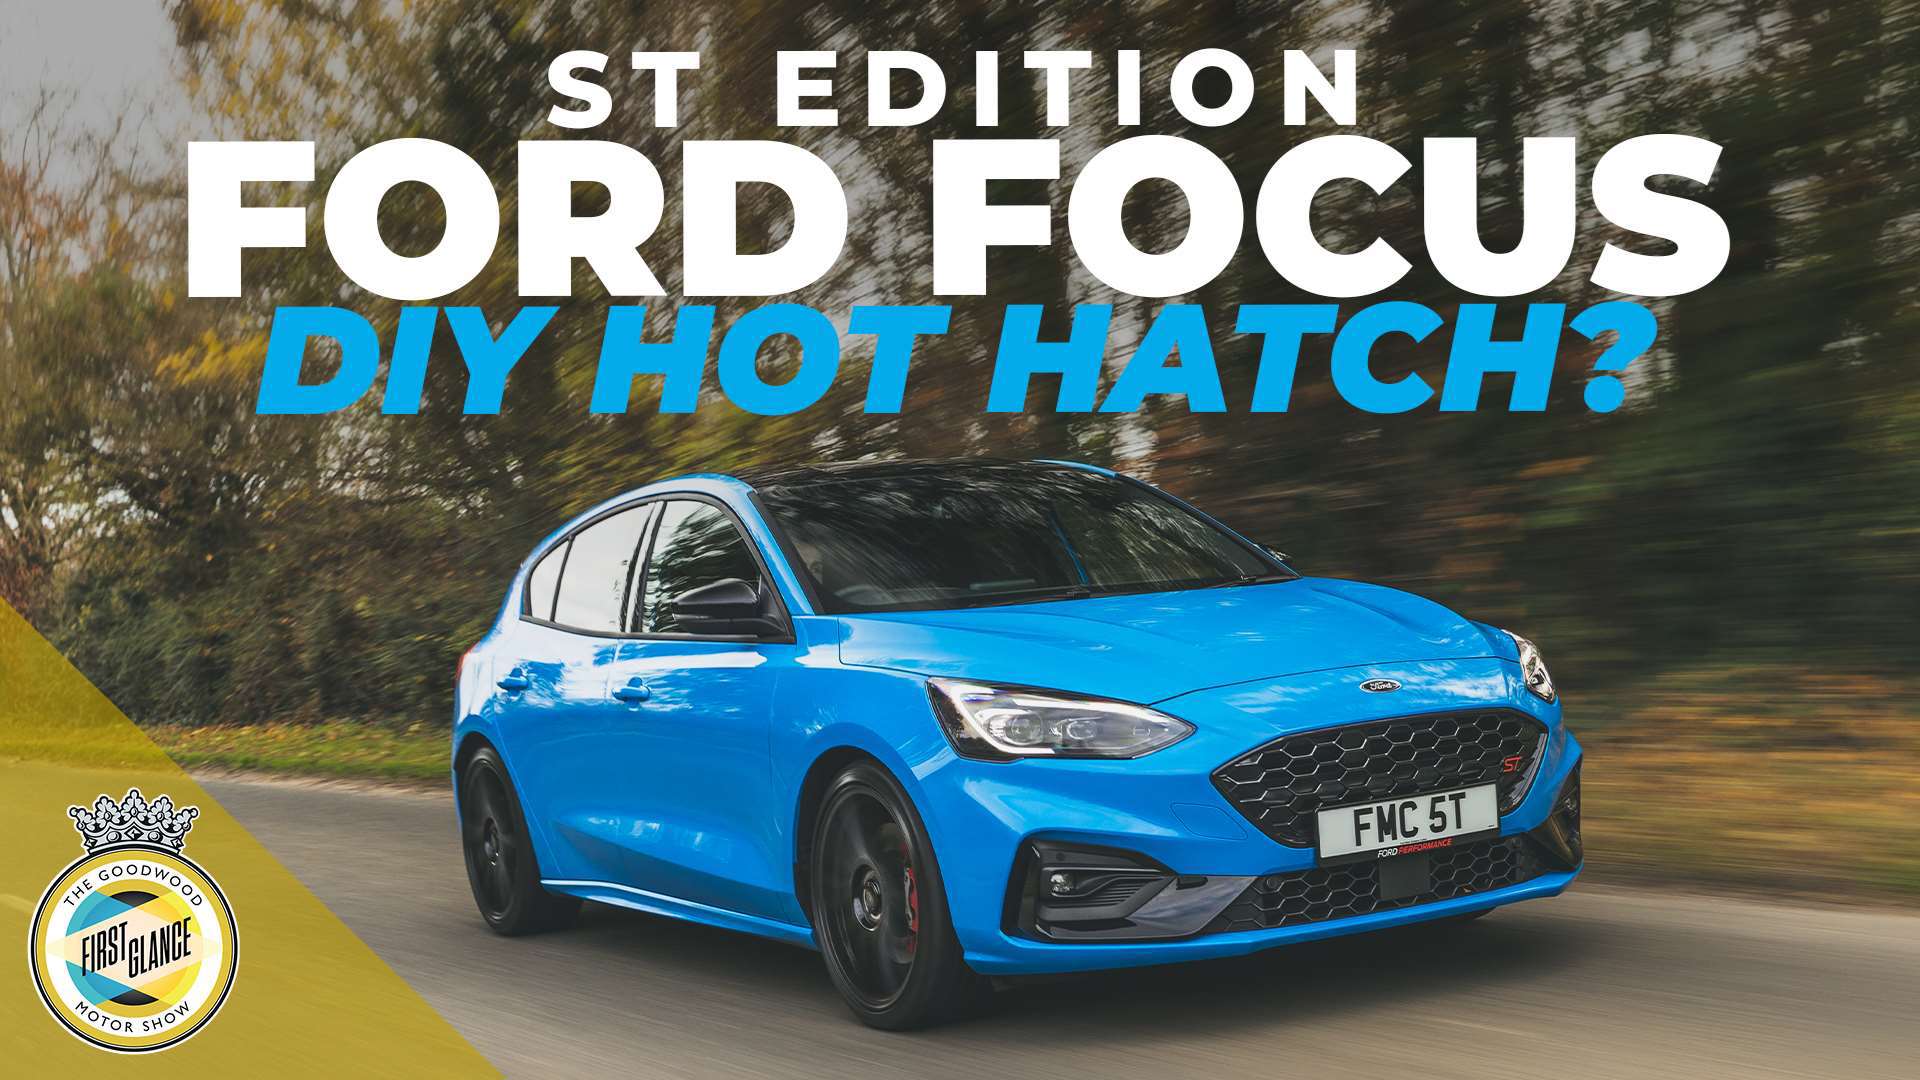 ford-focus-st-edition-video-review-09122021.jpg